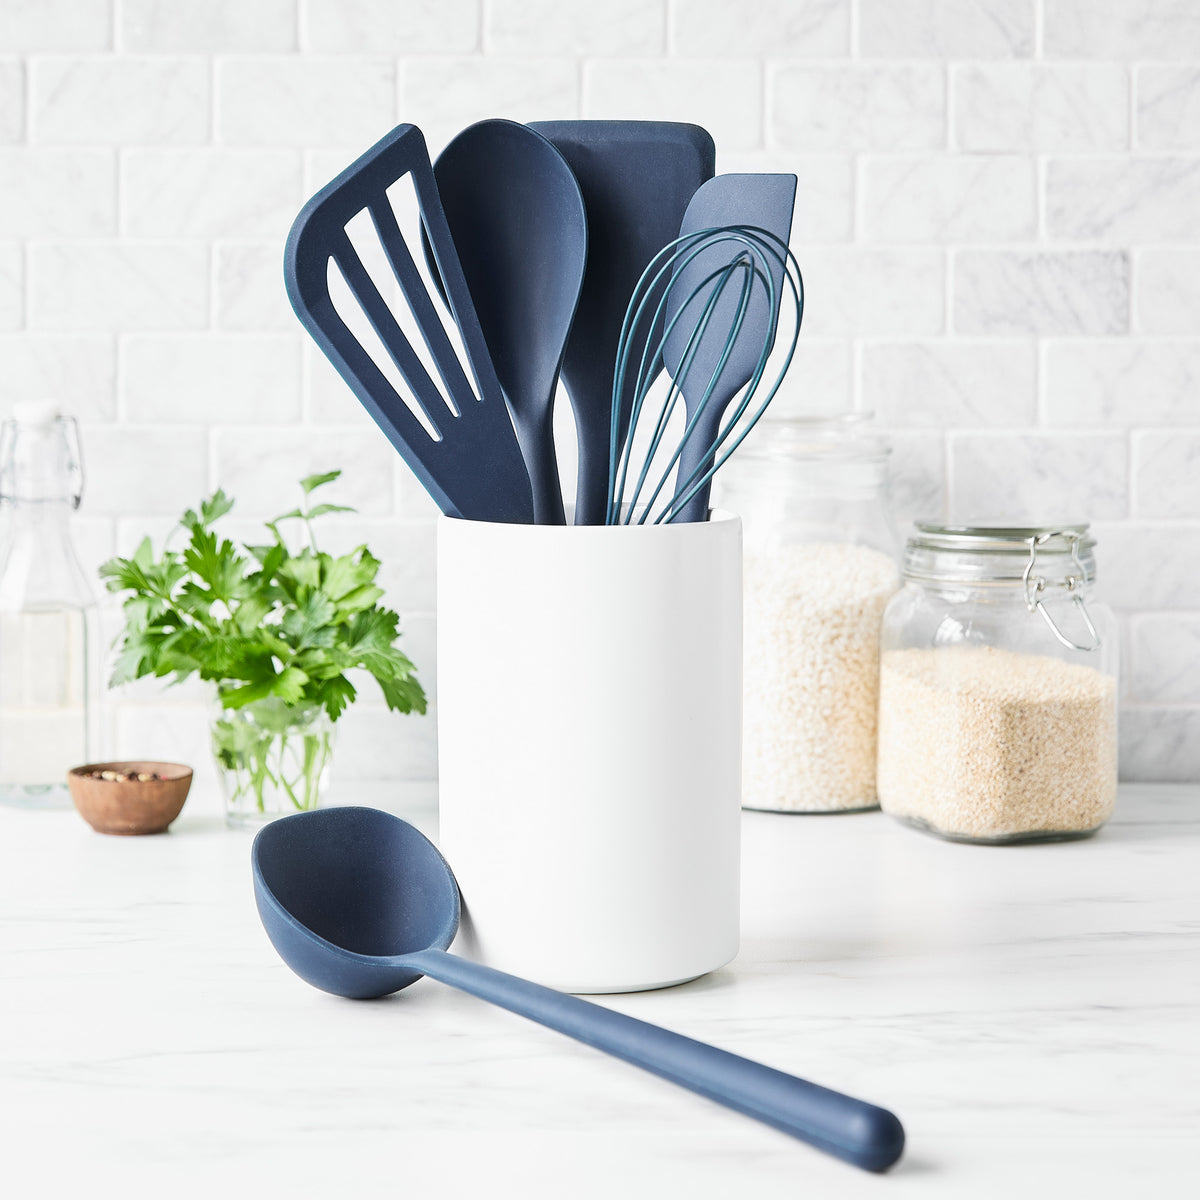 Healthy Non-Toxic PFAS Free Cookware - Platinum Silicone Tools 7-Piece Utensil Set | Navy by GreenPan